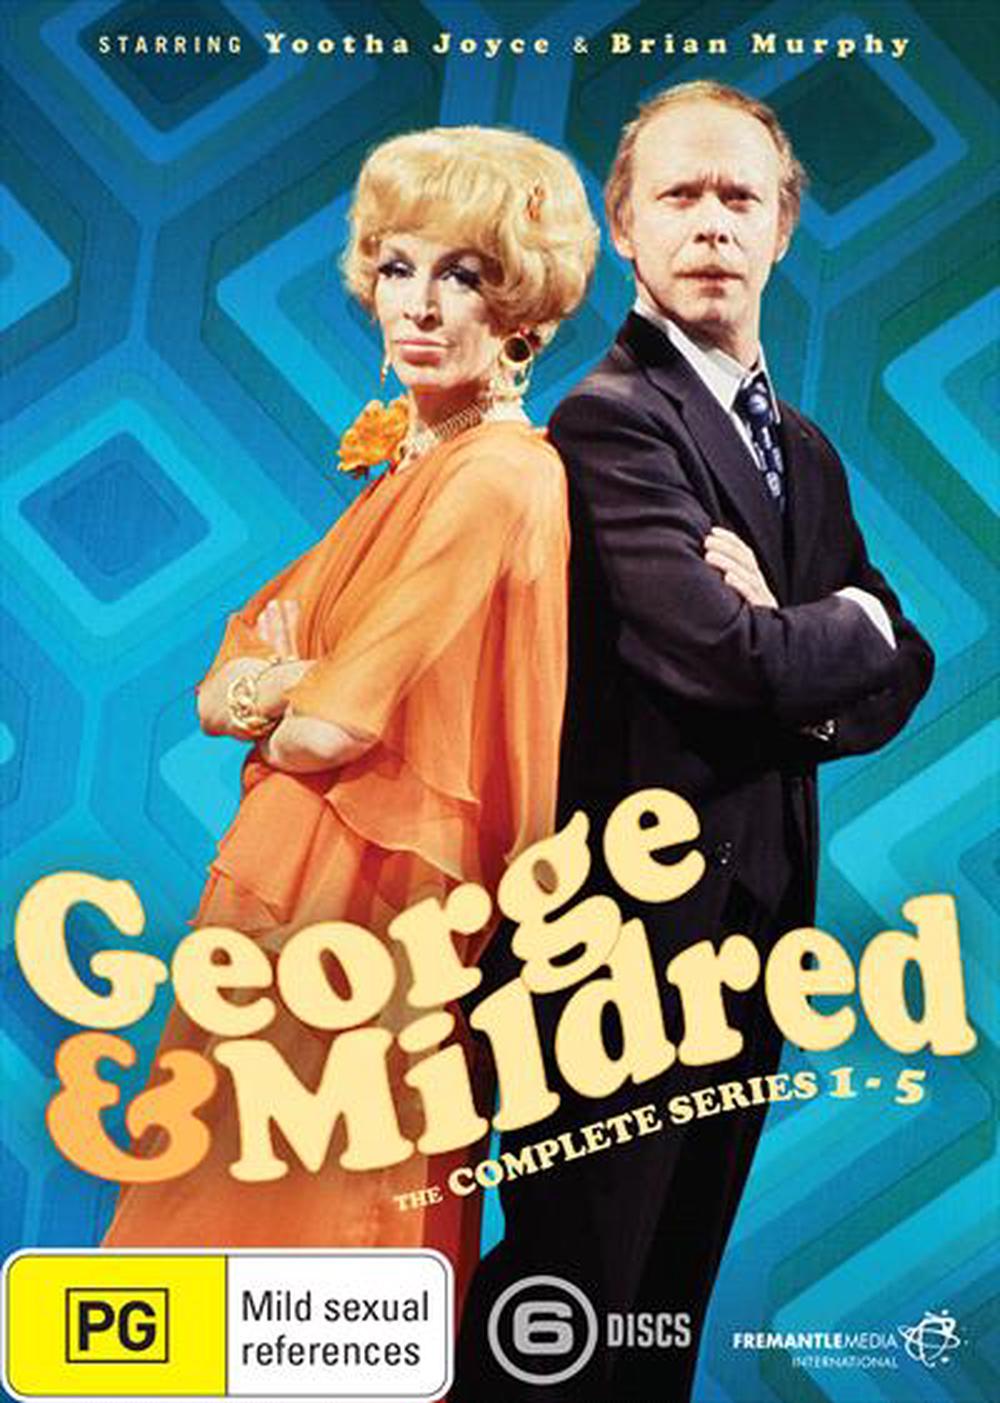 George And Mildred Series 1 5 Boxset Dvd Buy Online At The Nile 2261